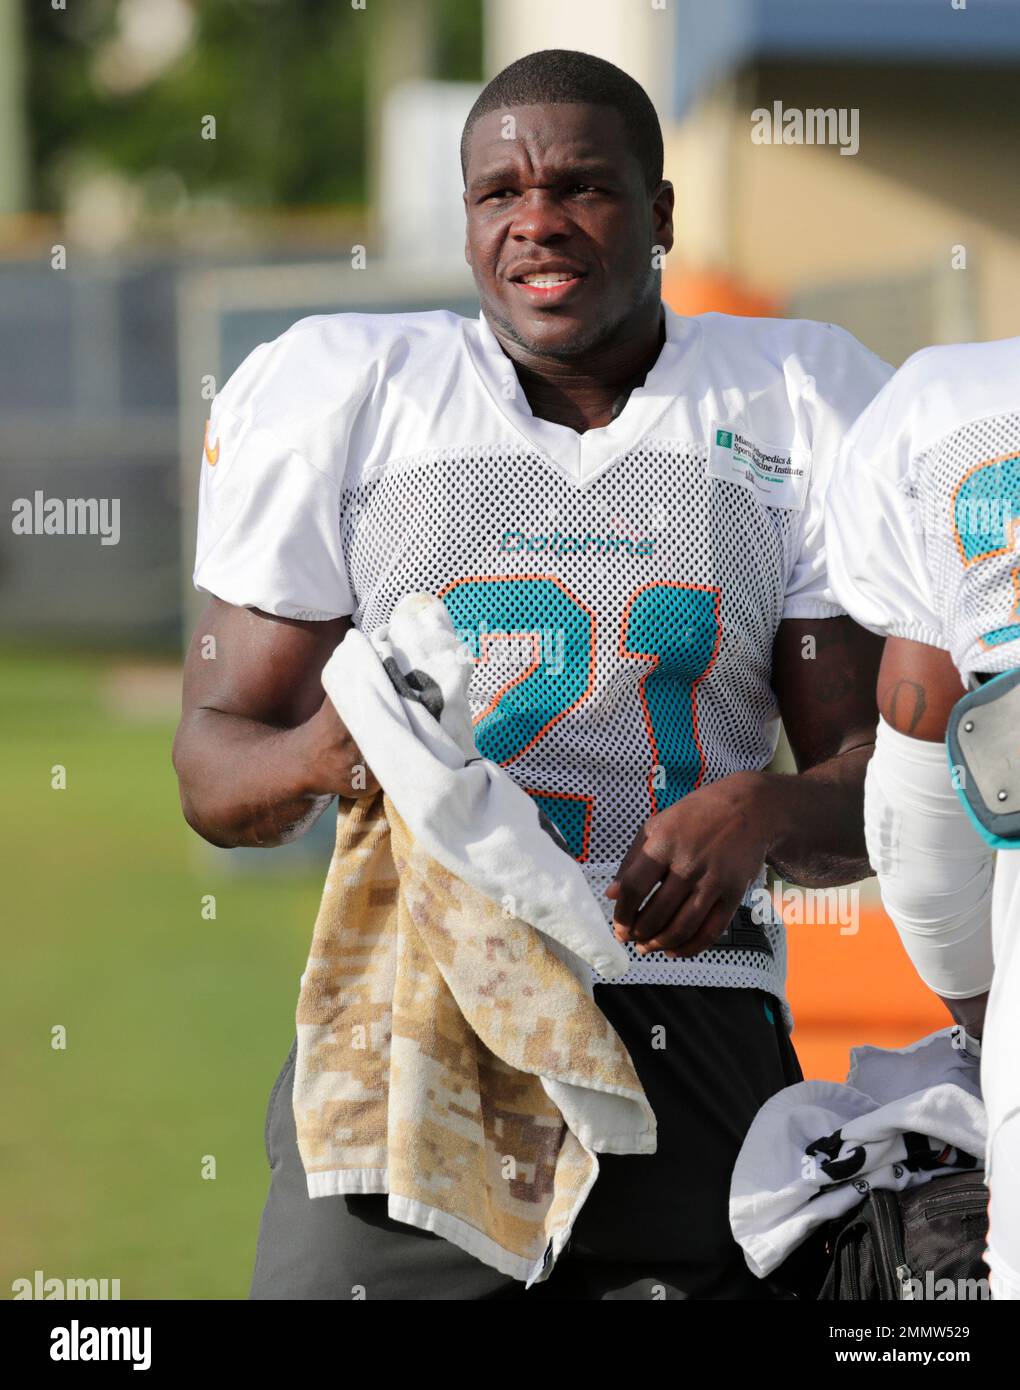 miami dolphins rb depth chart